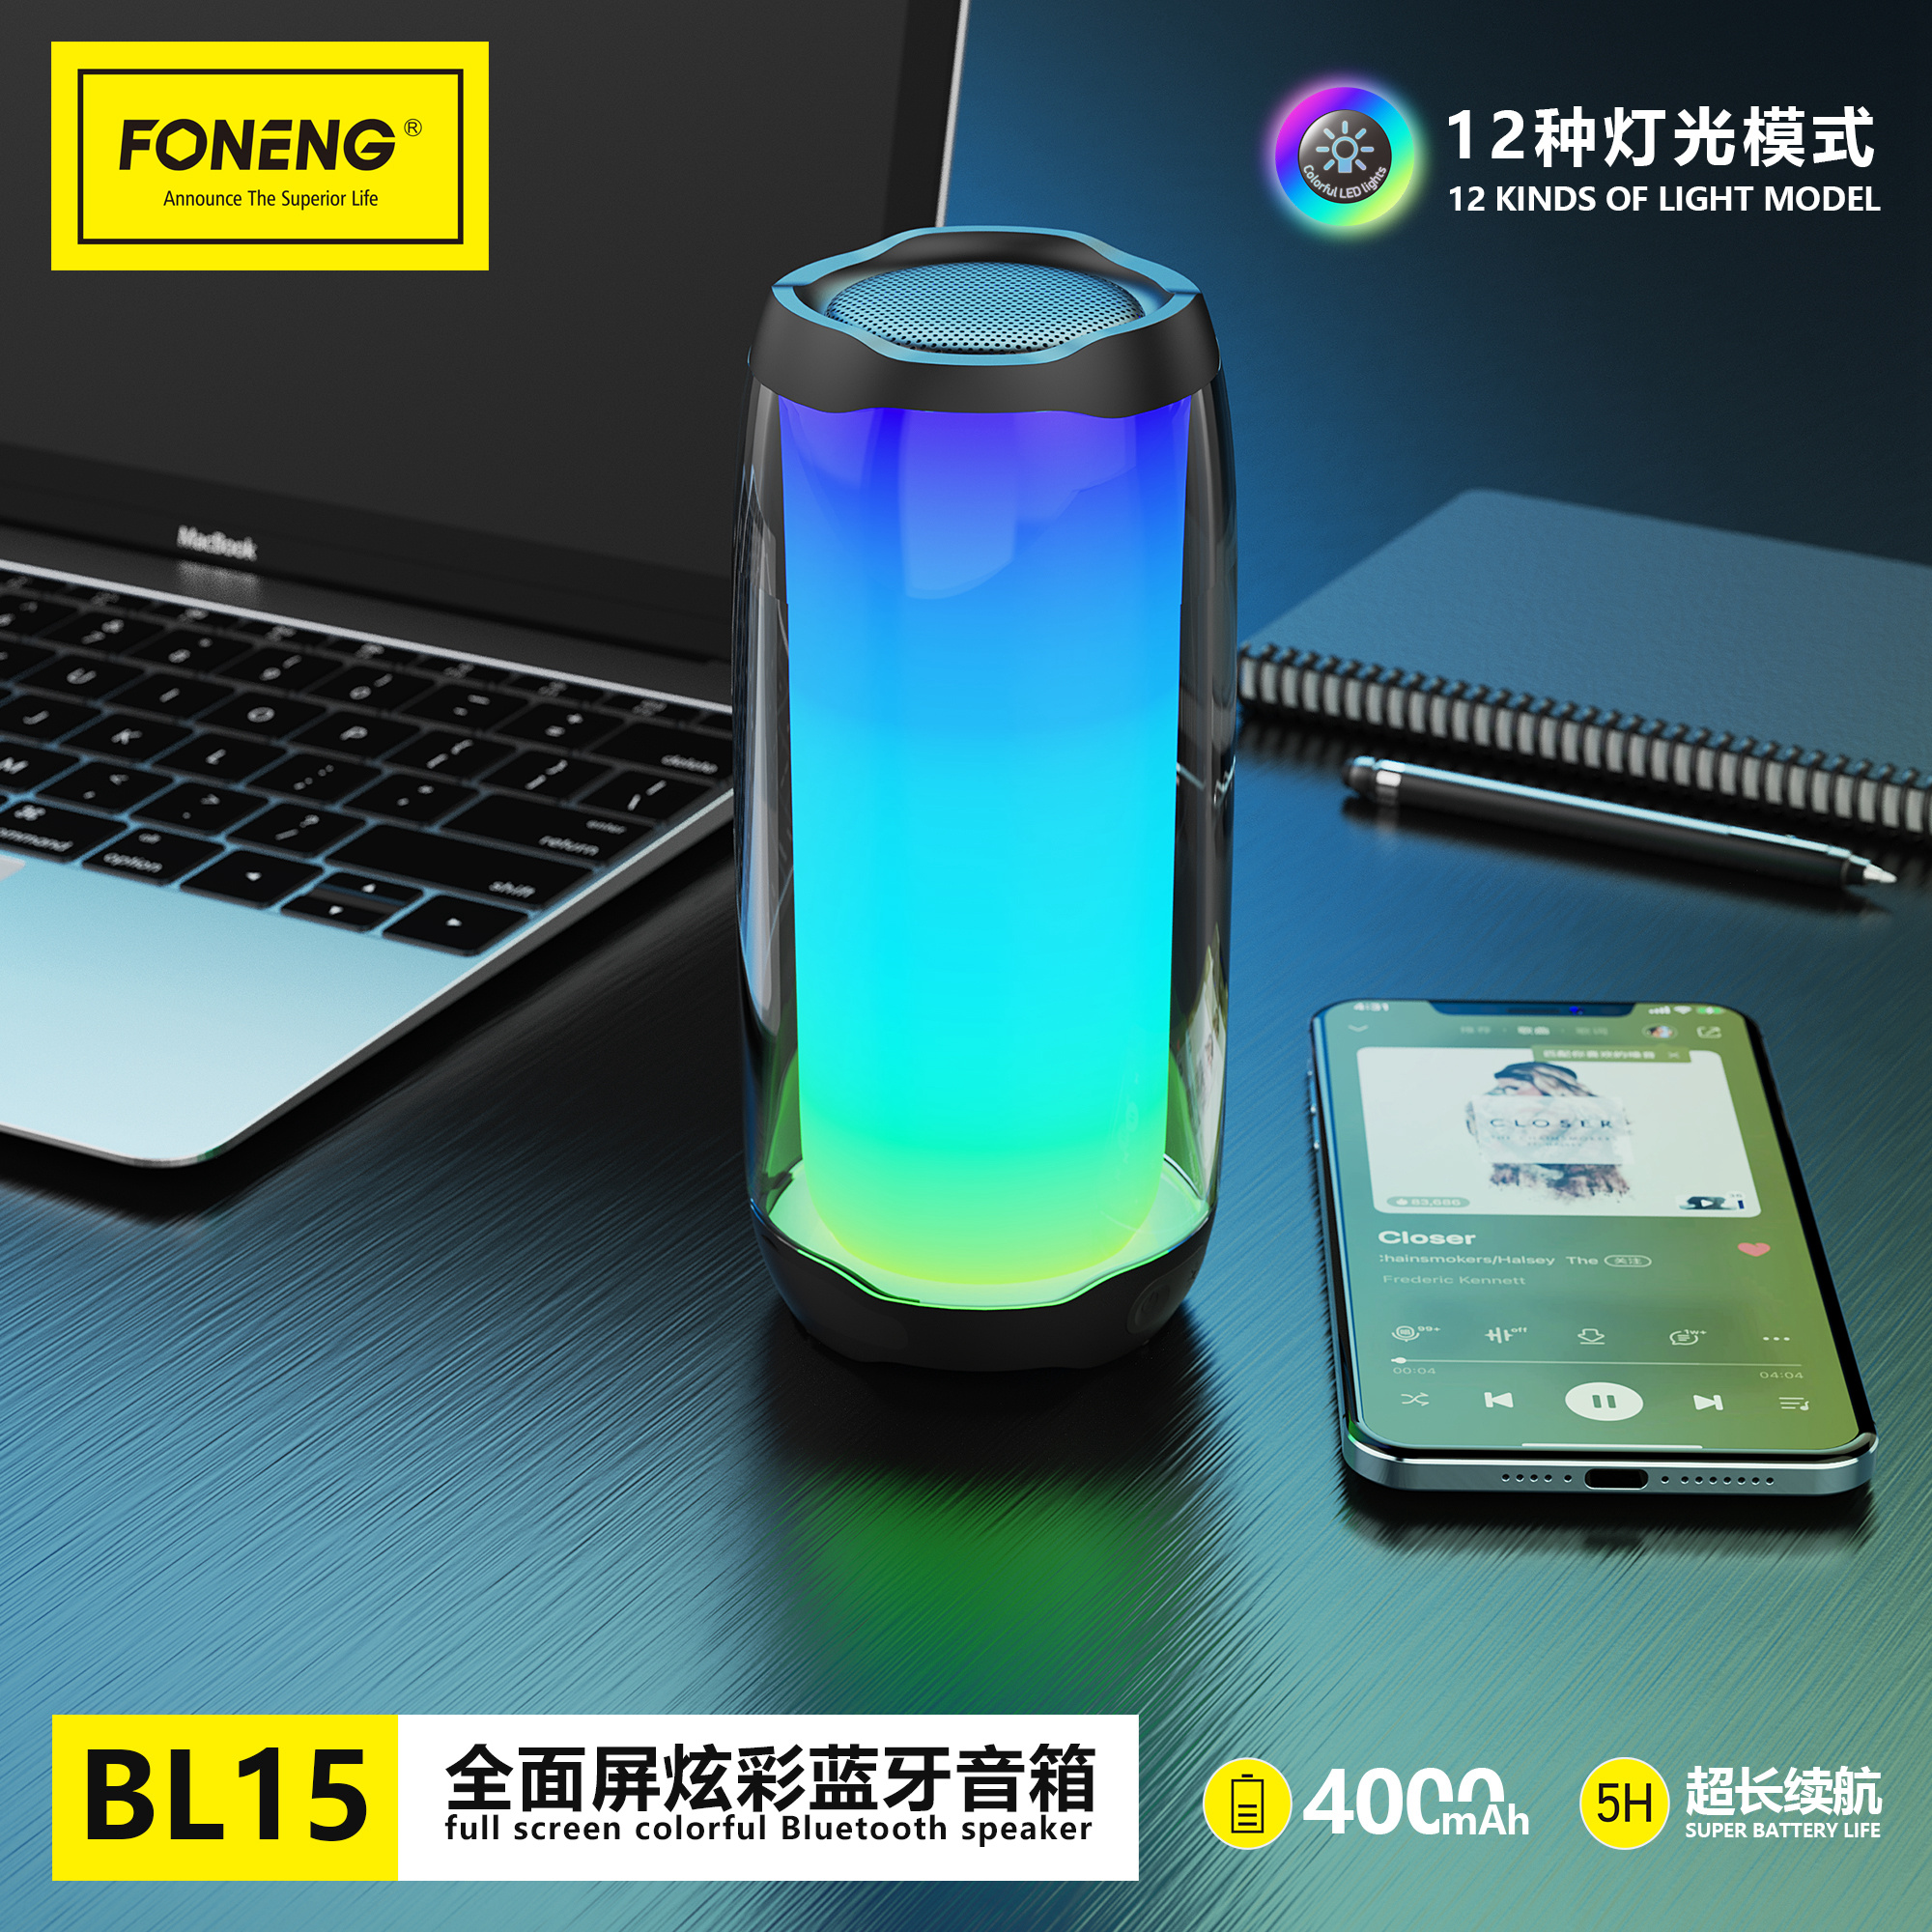 BL15 FULL SCREEN COLORFUL BLUETOOTH SPEAKER Featured Image